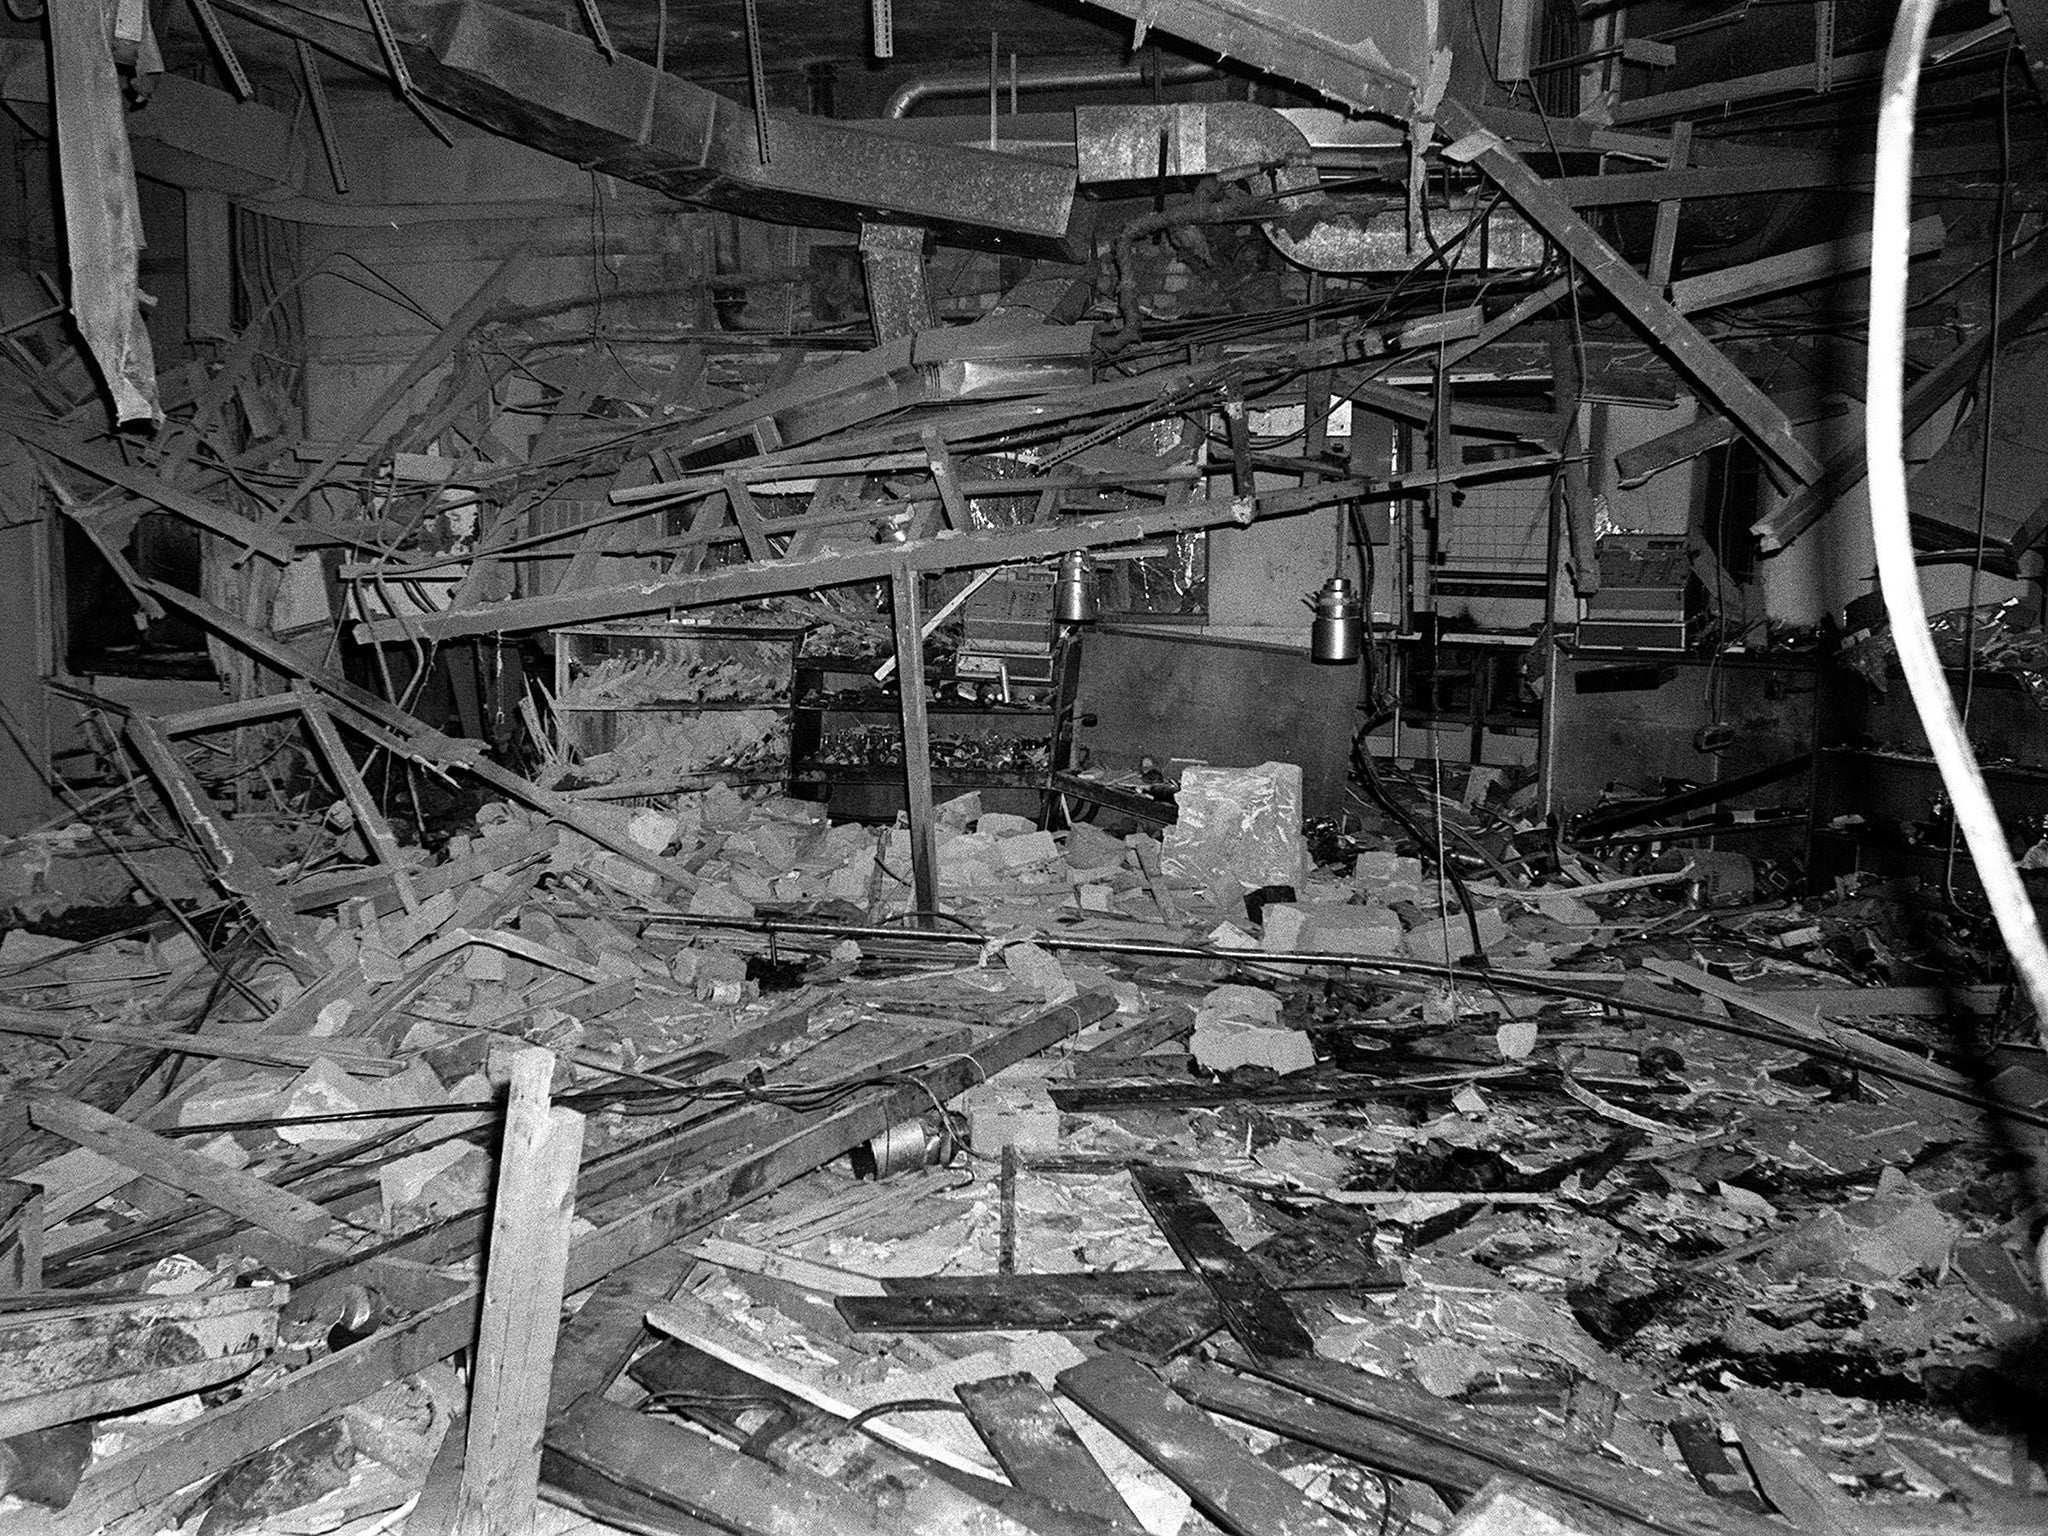 The decision to re-open the inquests into the Birmingham pub bombings has been welcomed